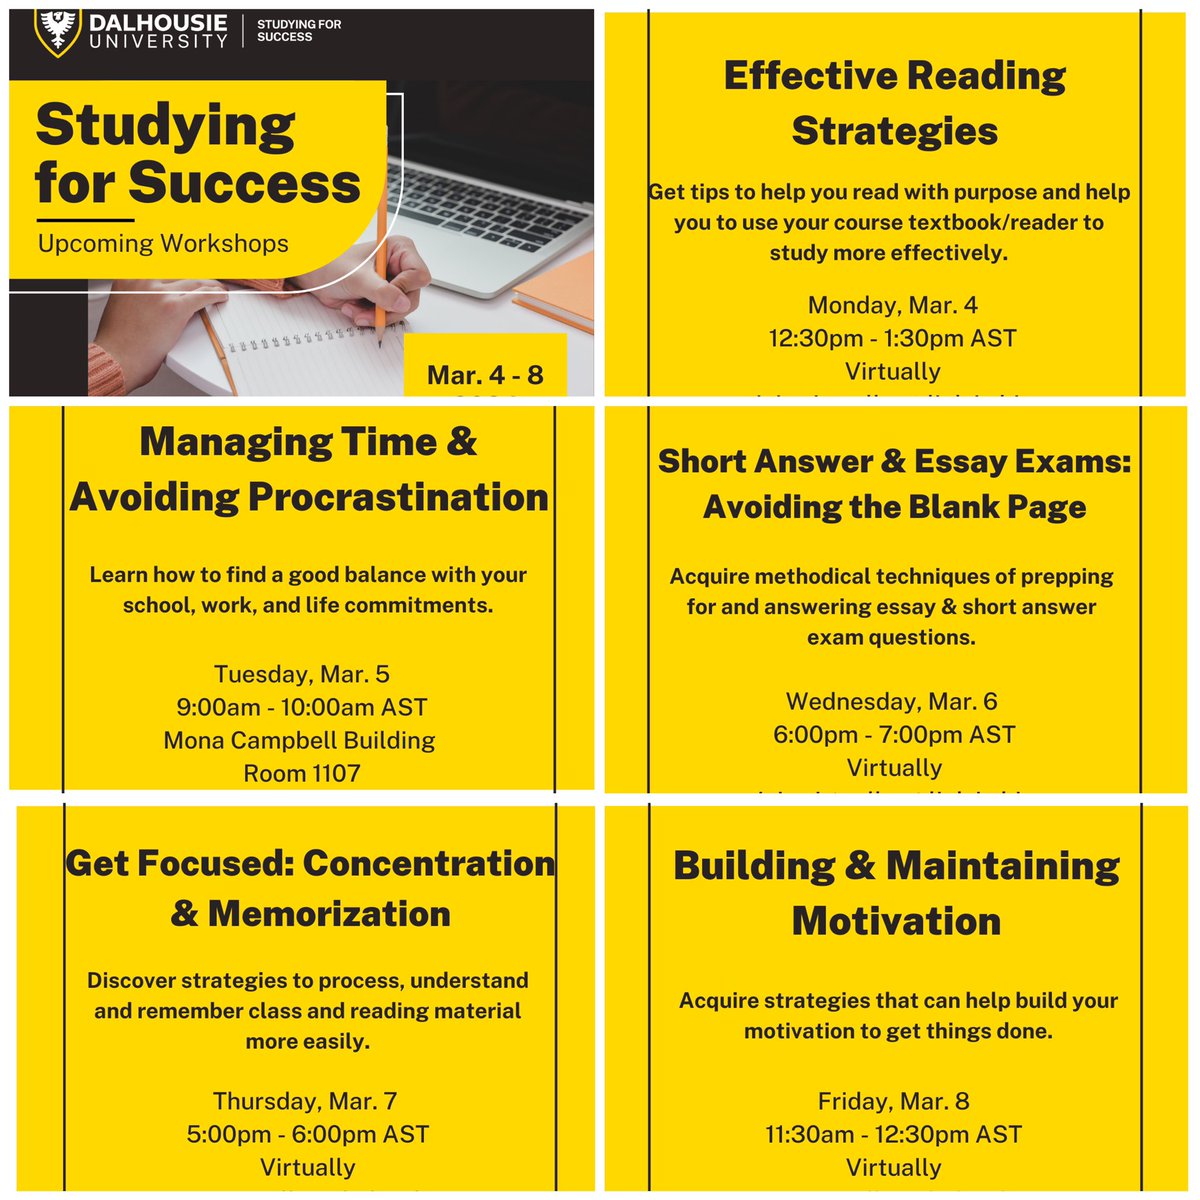 Want to stay on track this Winter semester? Want to learn how to study smarter? Come join our FREE SFS workshops next week. 
#StudentSupport #StudentSuccess #DalhousieU #DalhousieUniversity #DalStudentLife #StudentLife #DalStudentSuccess #StudySmarter #DalhousieStudying